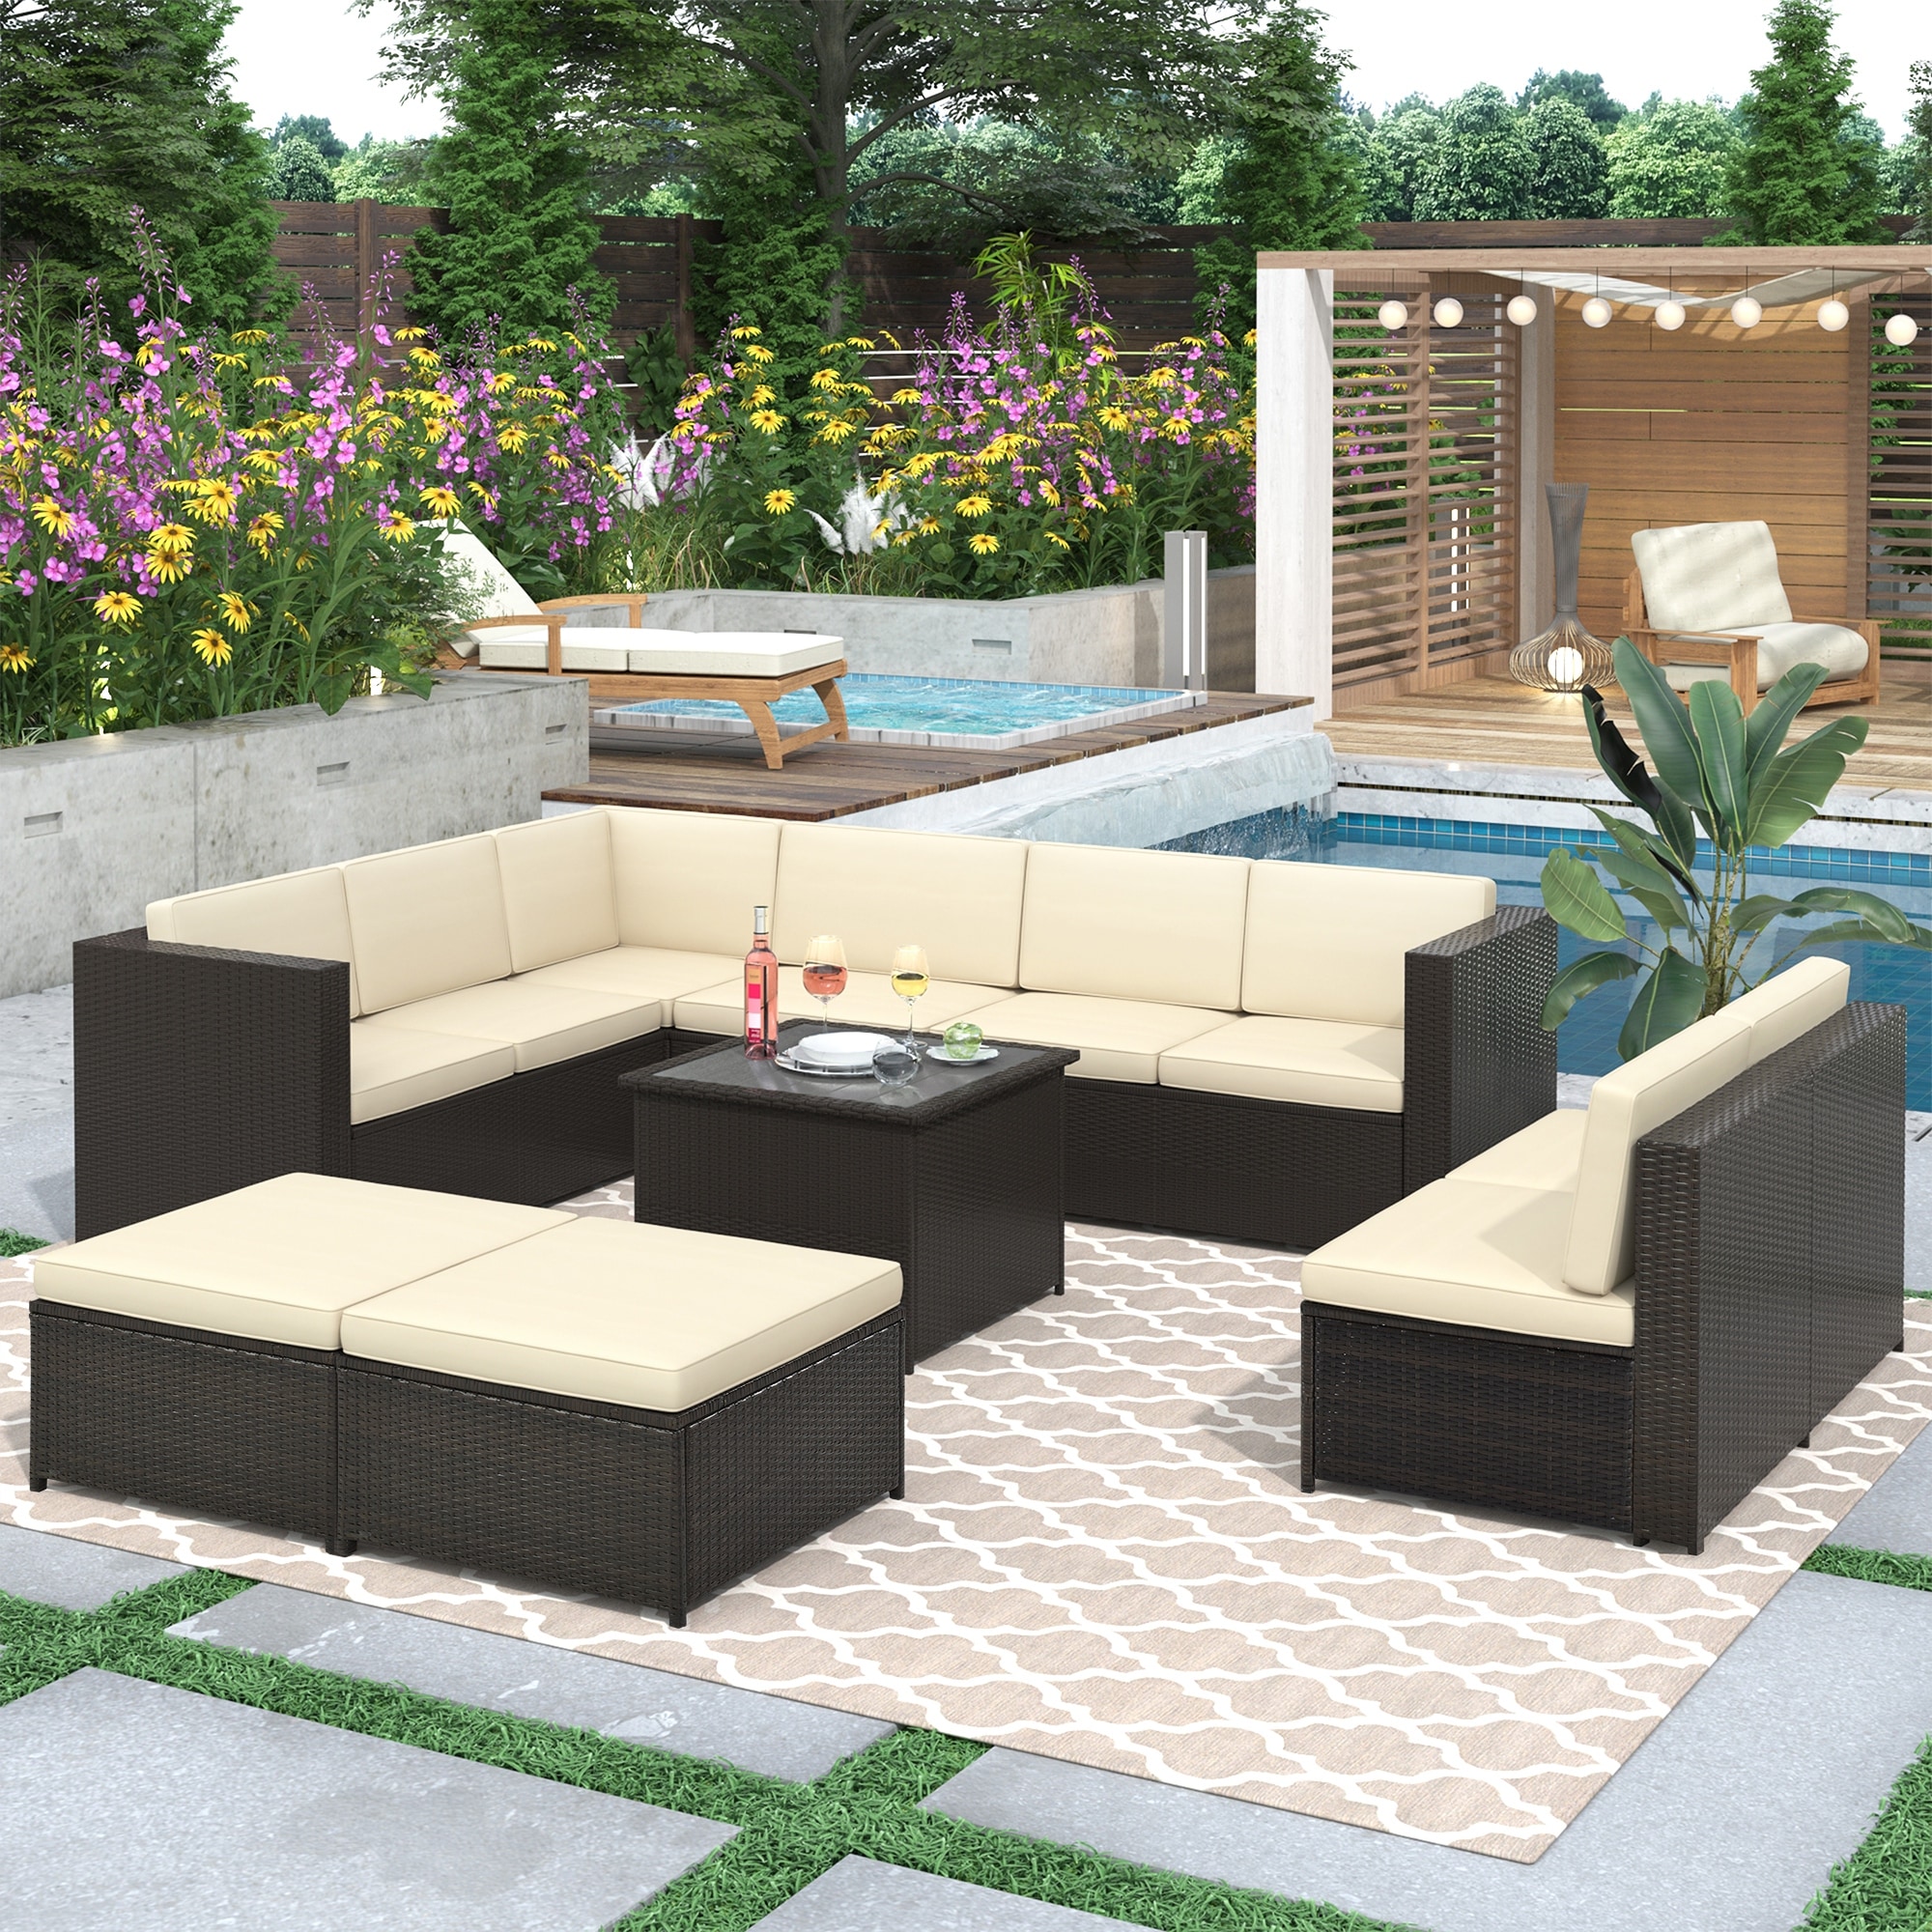 Outdoor Rattan Sectional Seating Group With 9-10 Seating Capacity